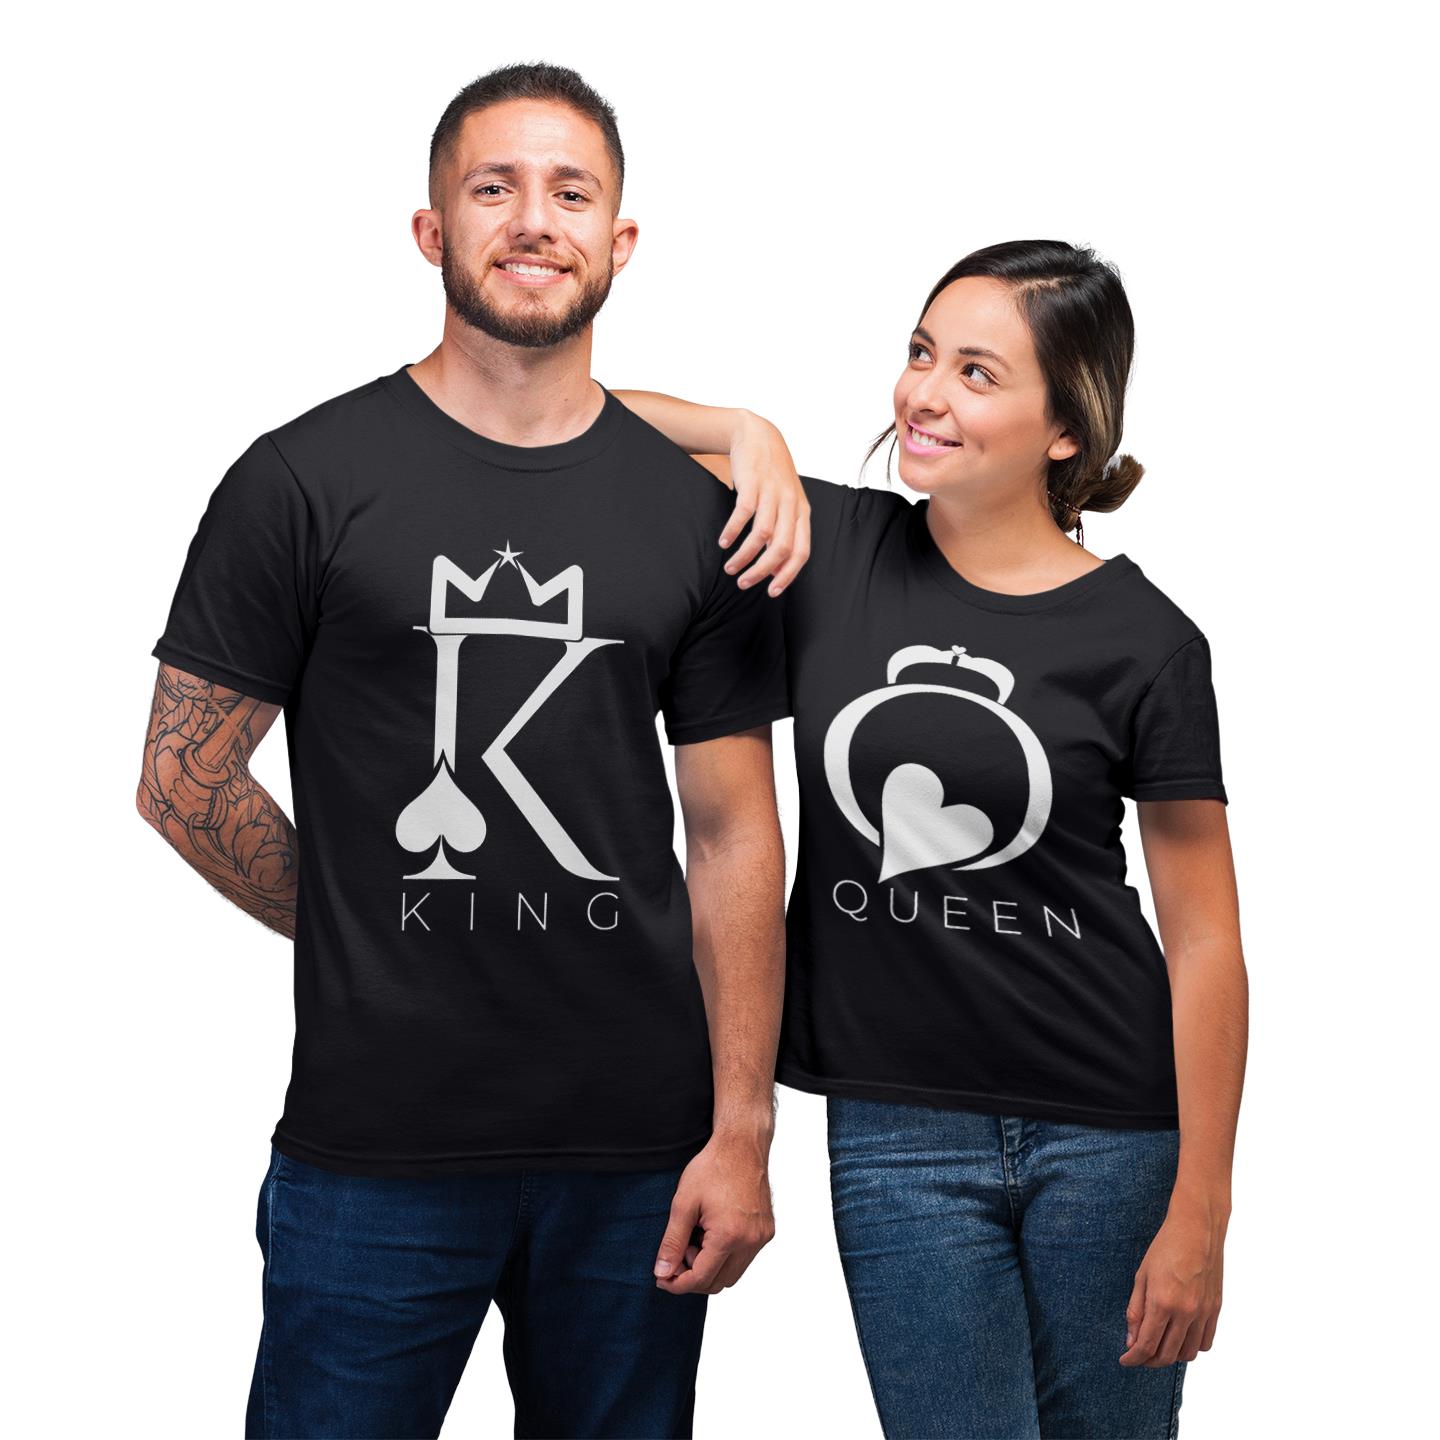 King And Queen Crown Shirt For Couple Matching T-shirt